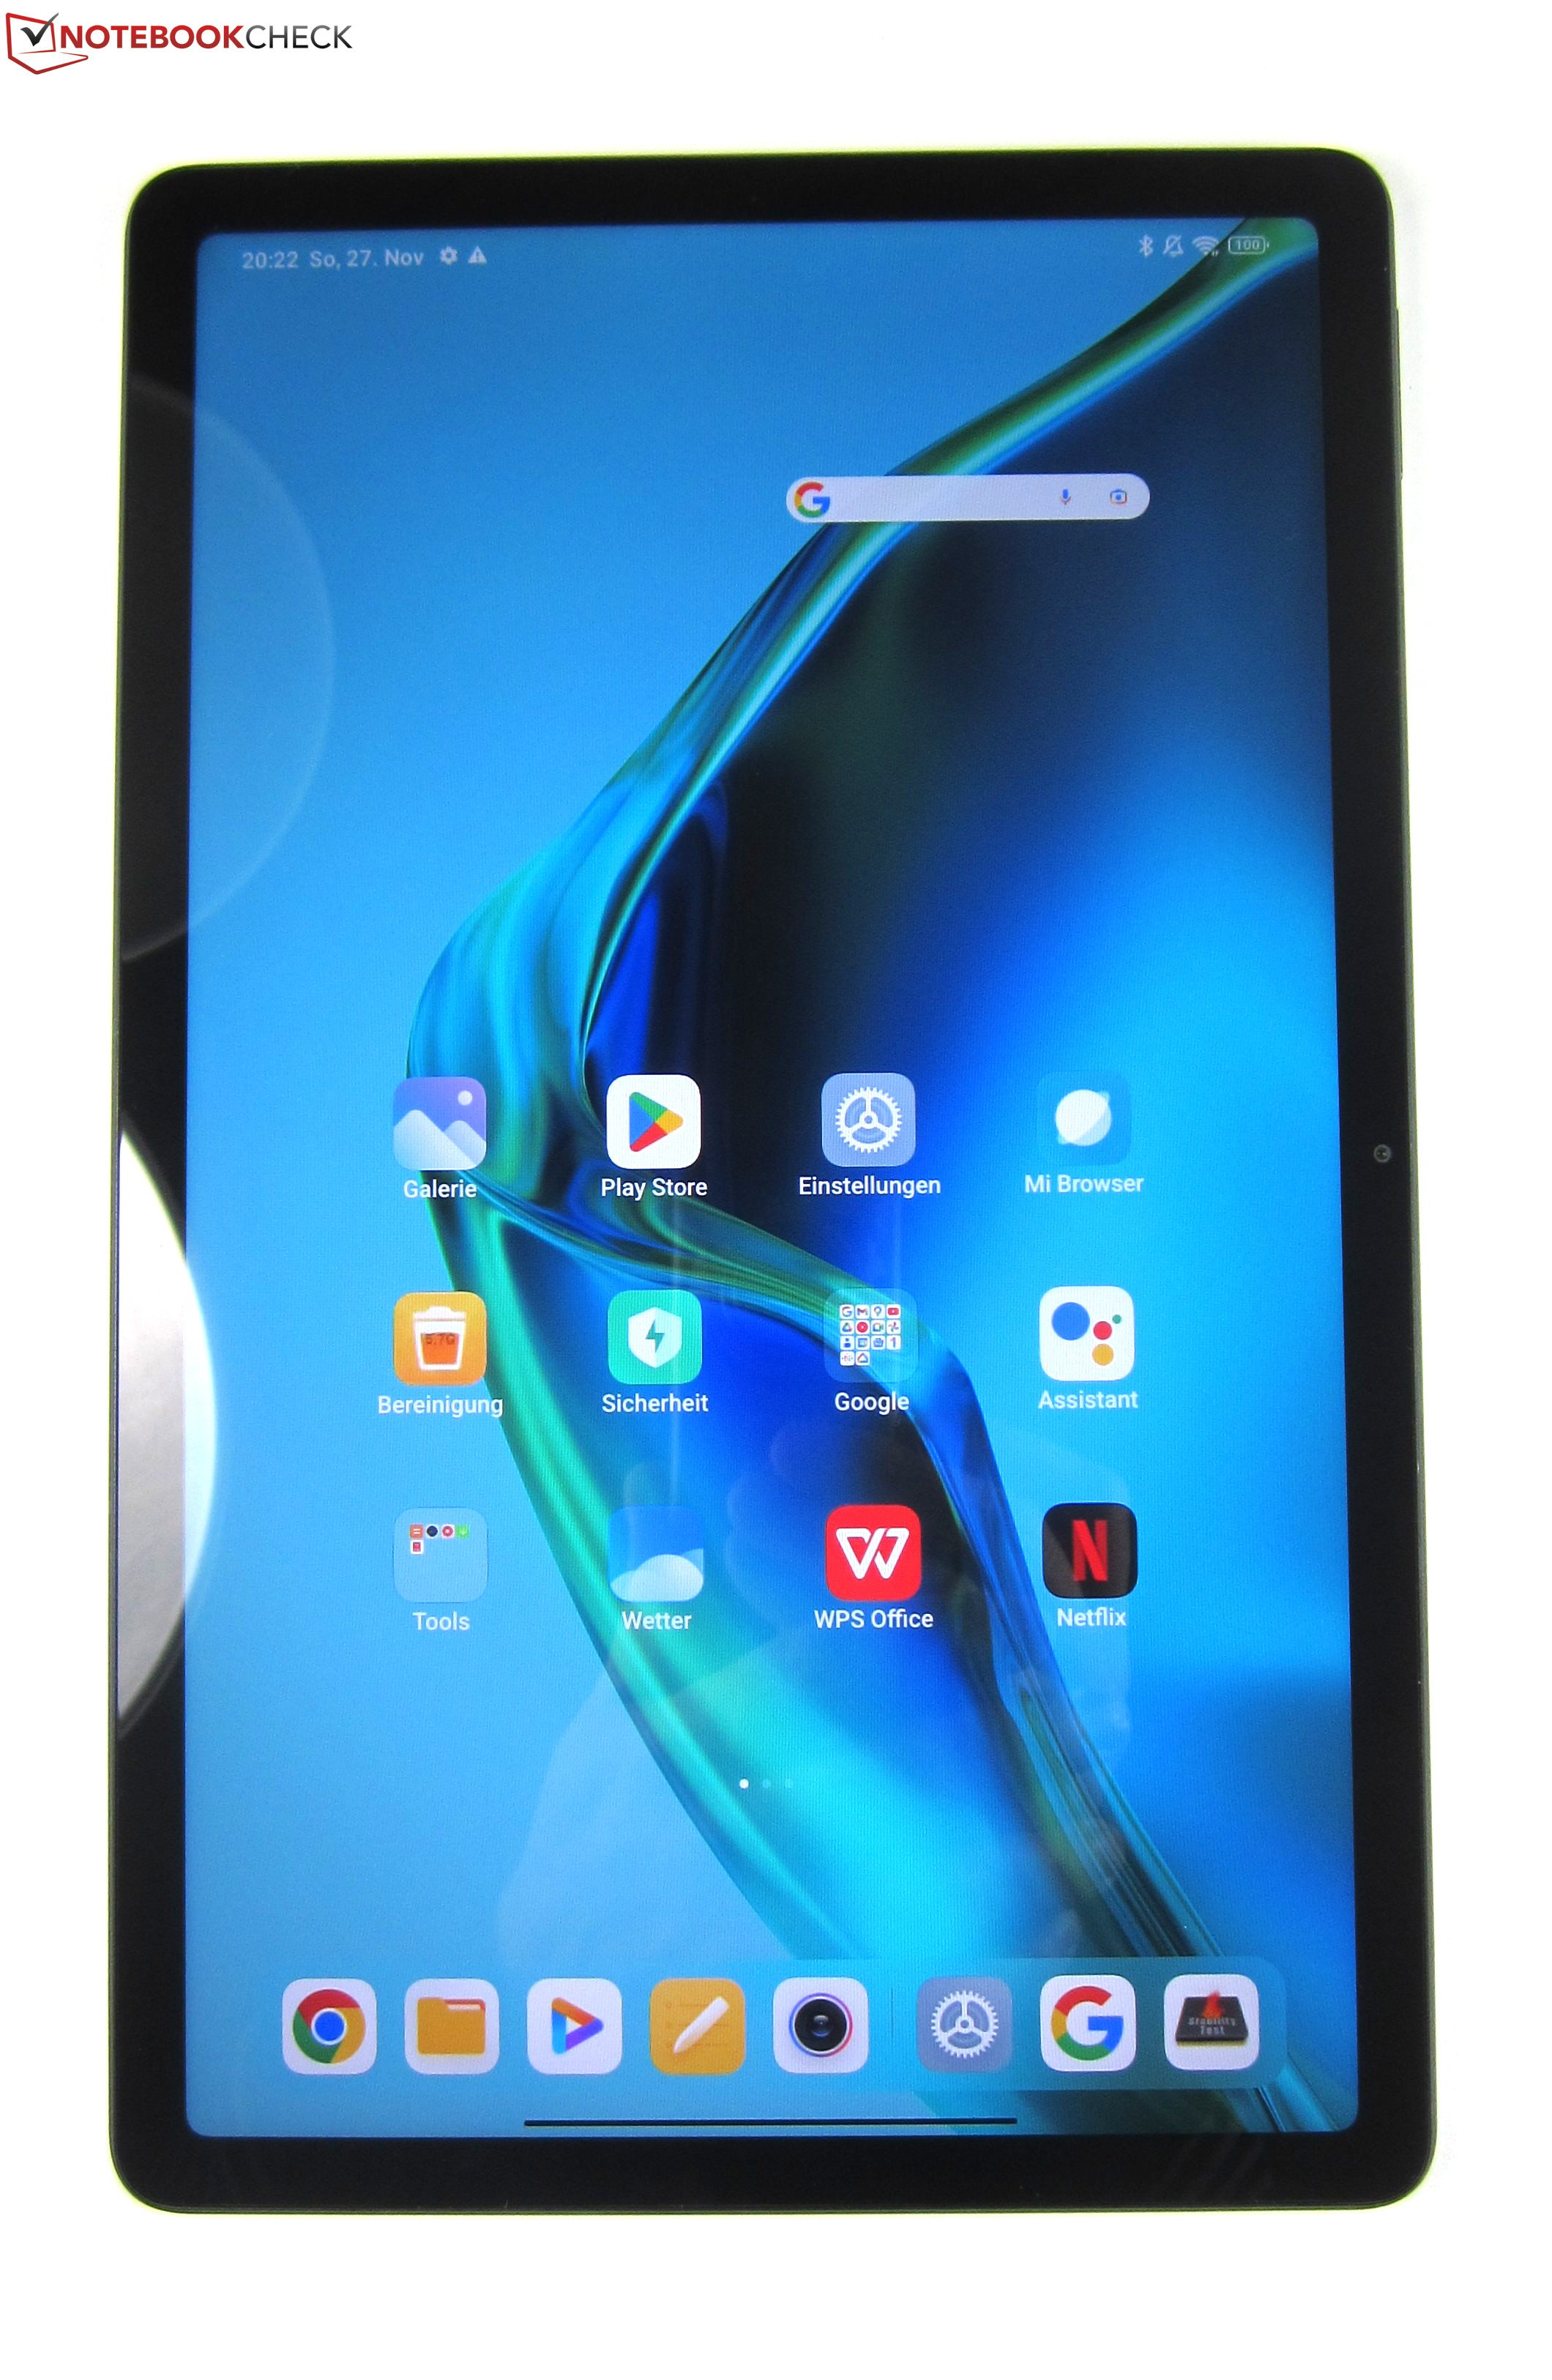 Redmi Pad Review: Noteworthy budget tablet